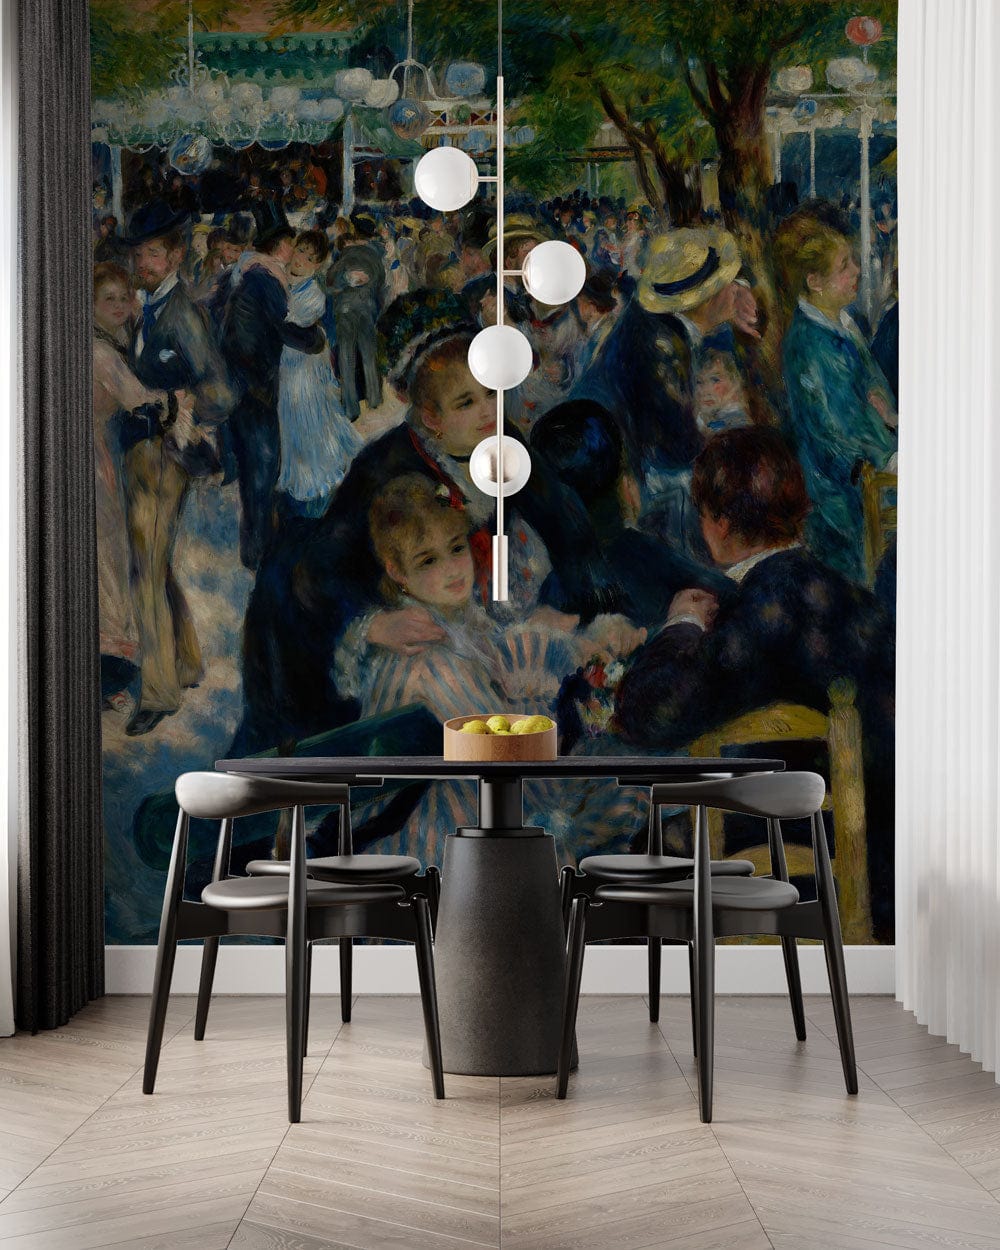 Ball at the Moulin De La Galete Wallpaper Mural for Dining Room Decor